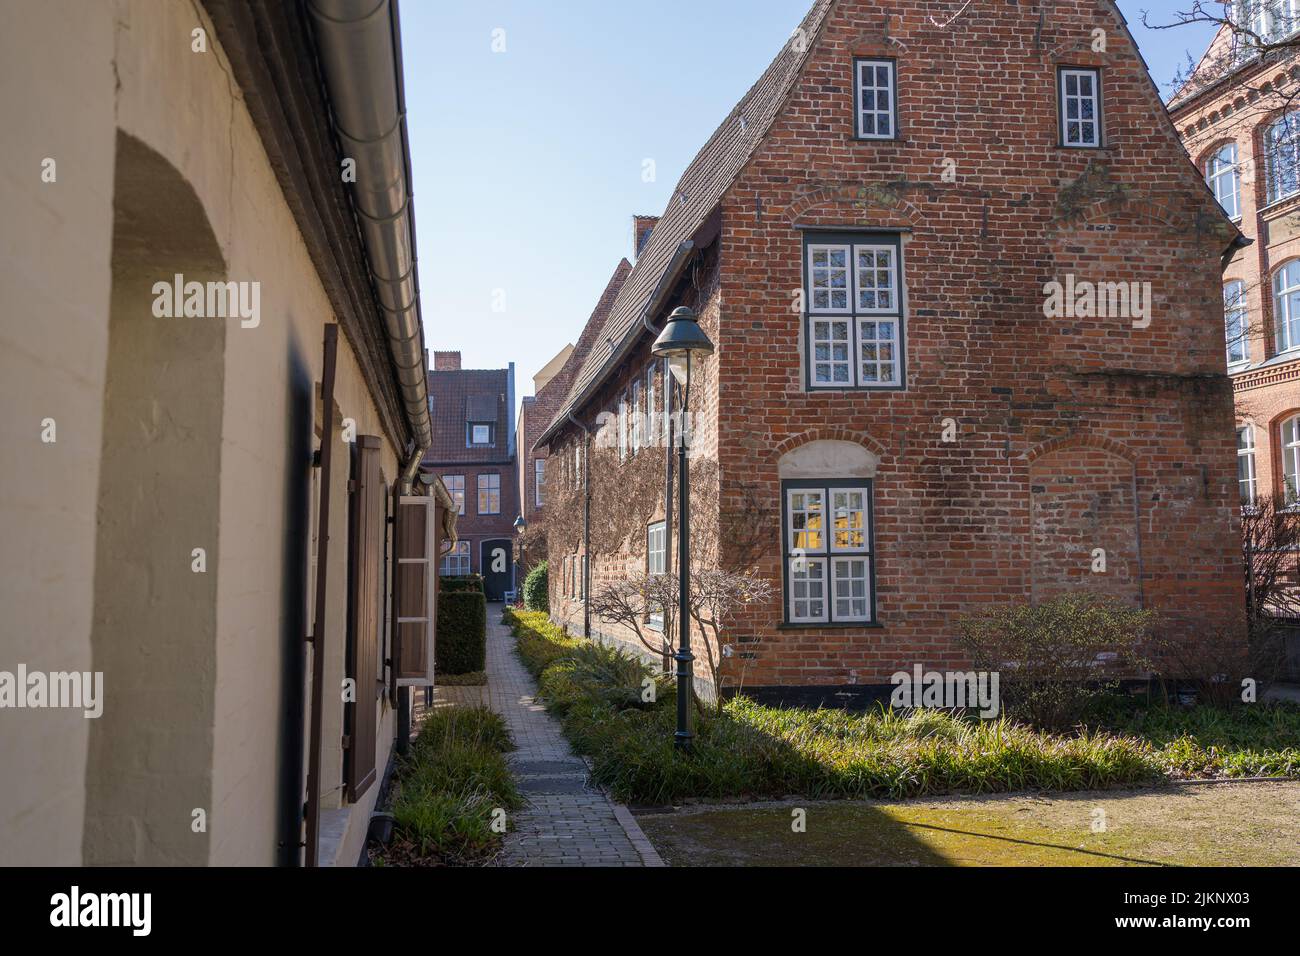 A row of stone historic houses in an alley in Lubeck, Germany Stock Photo